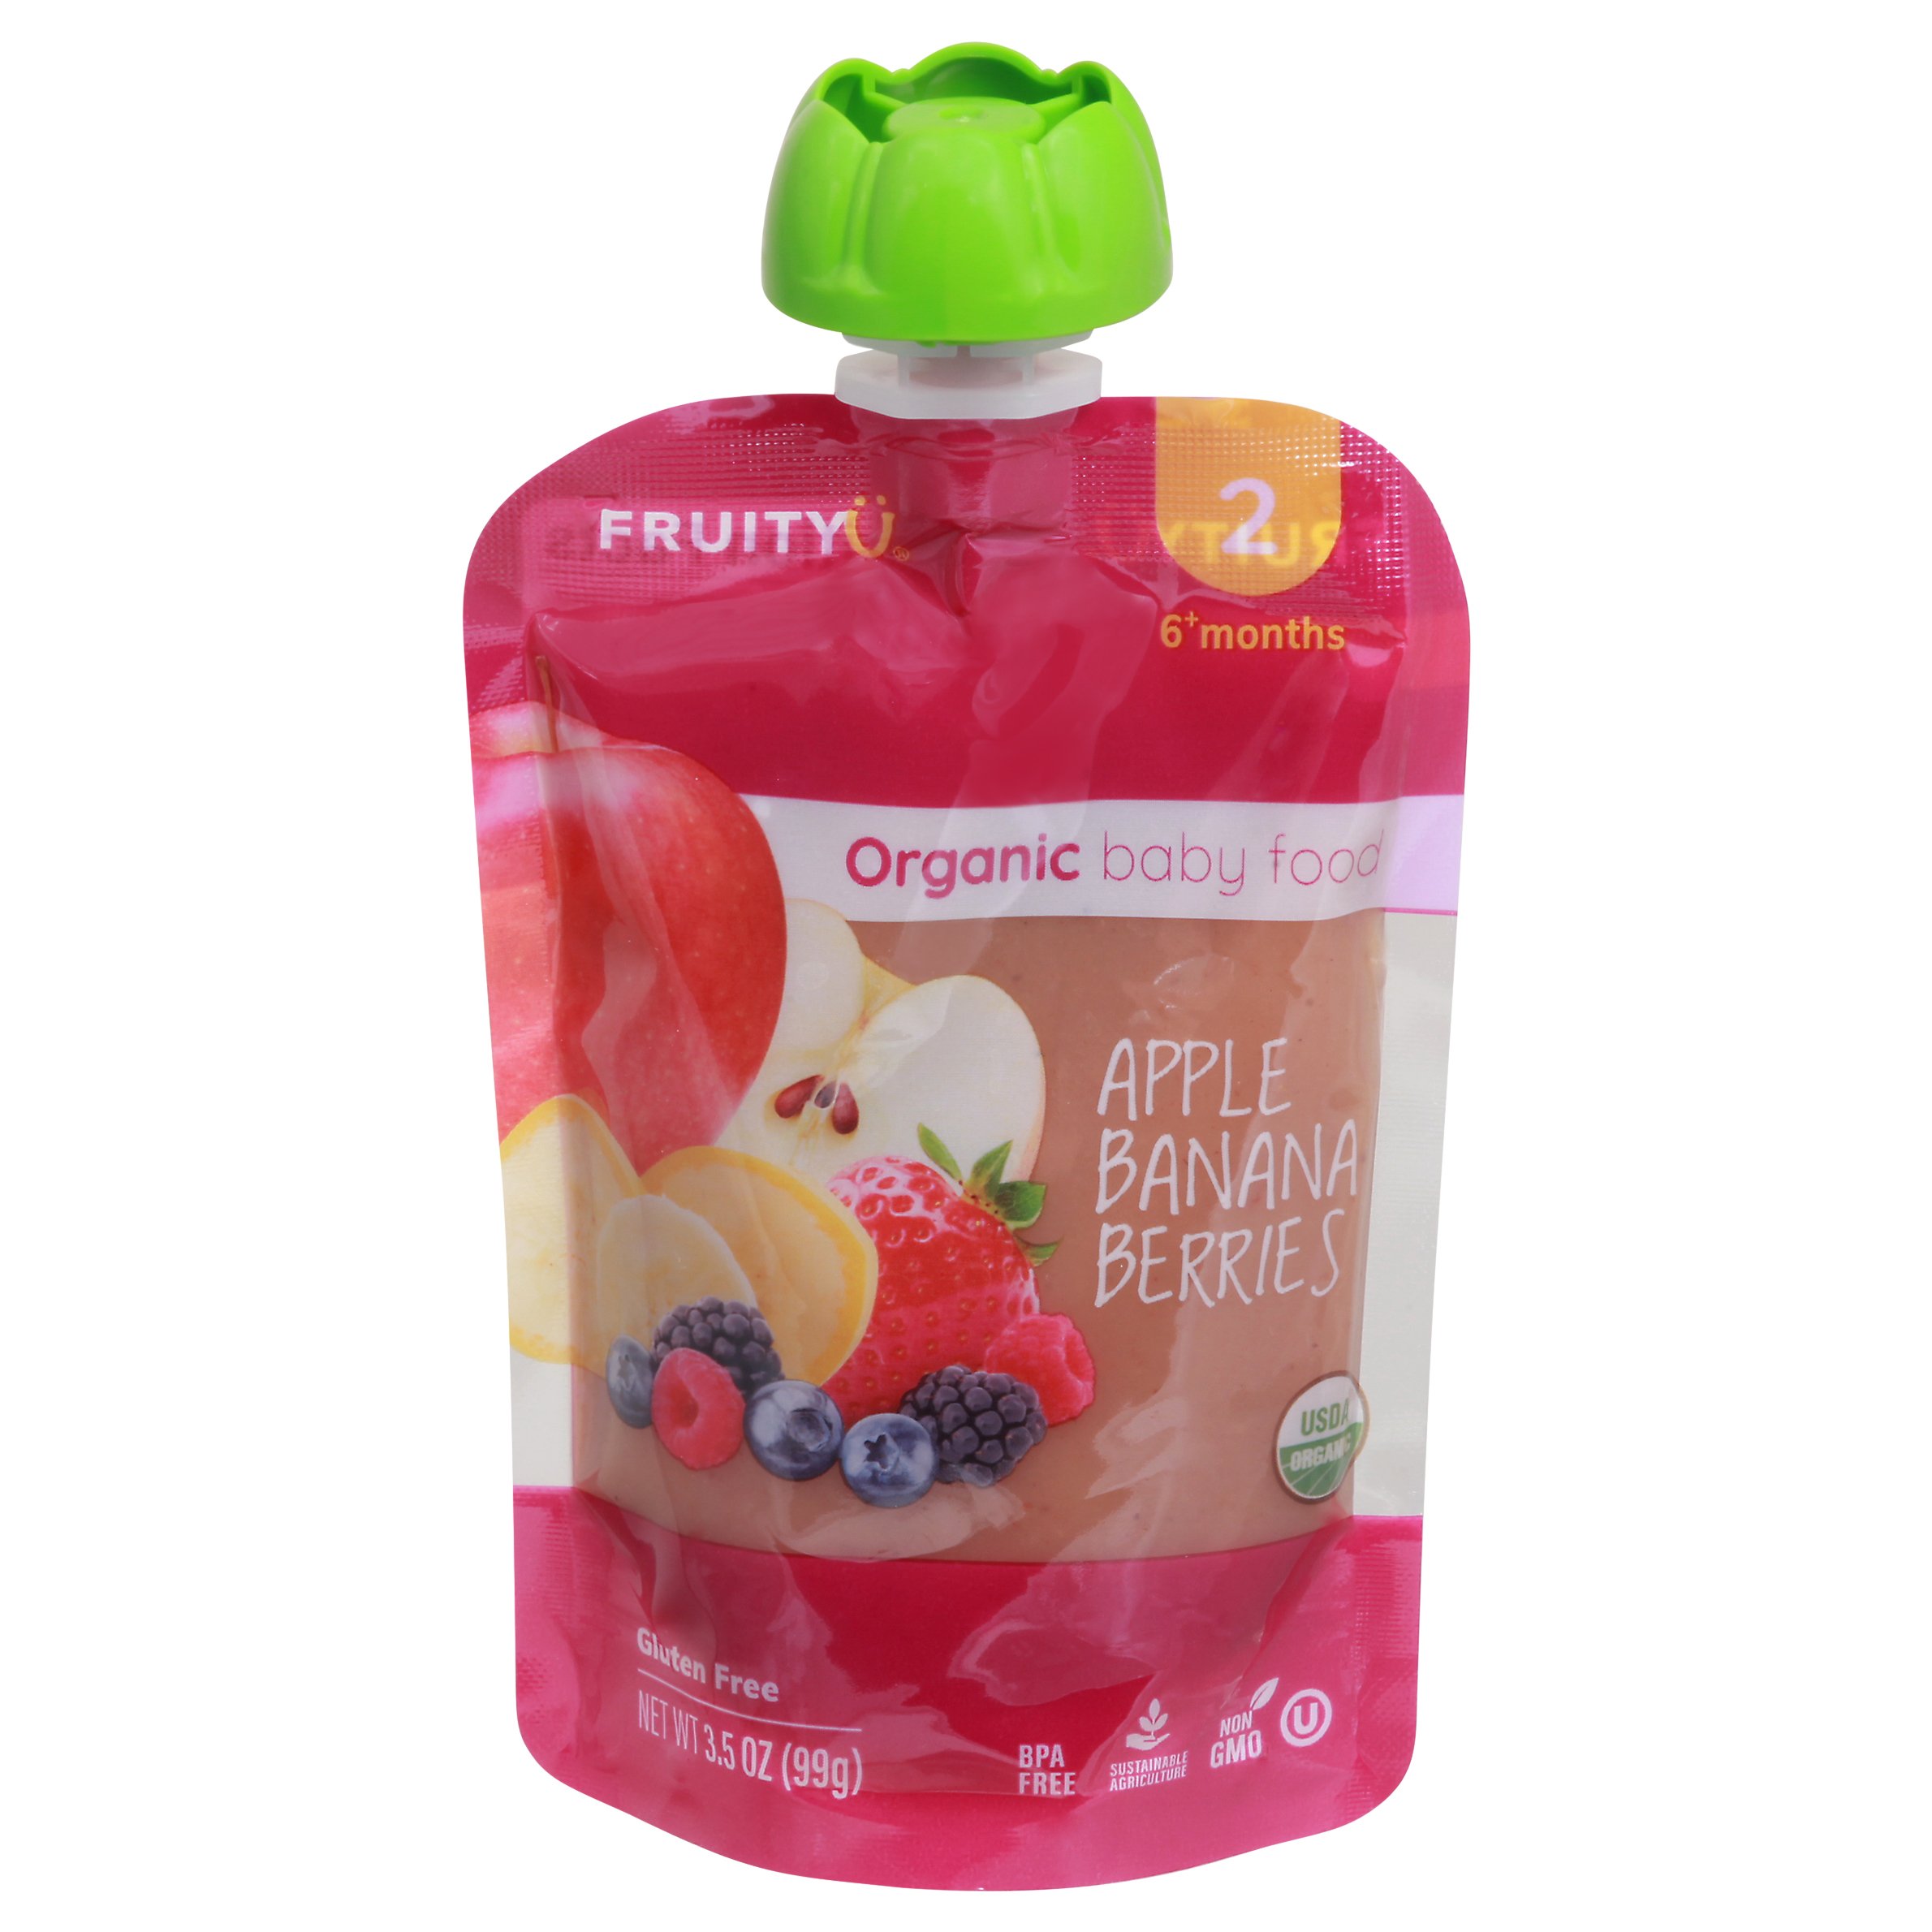 INFANT FRESH FRUIT AND VEGETABLES – Lulyboo